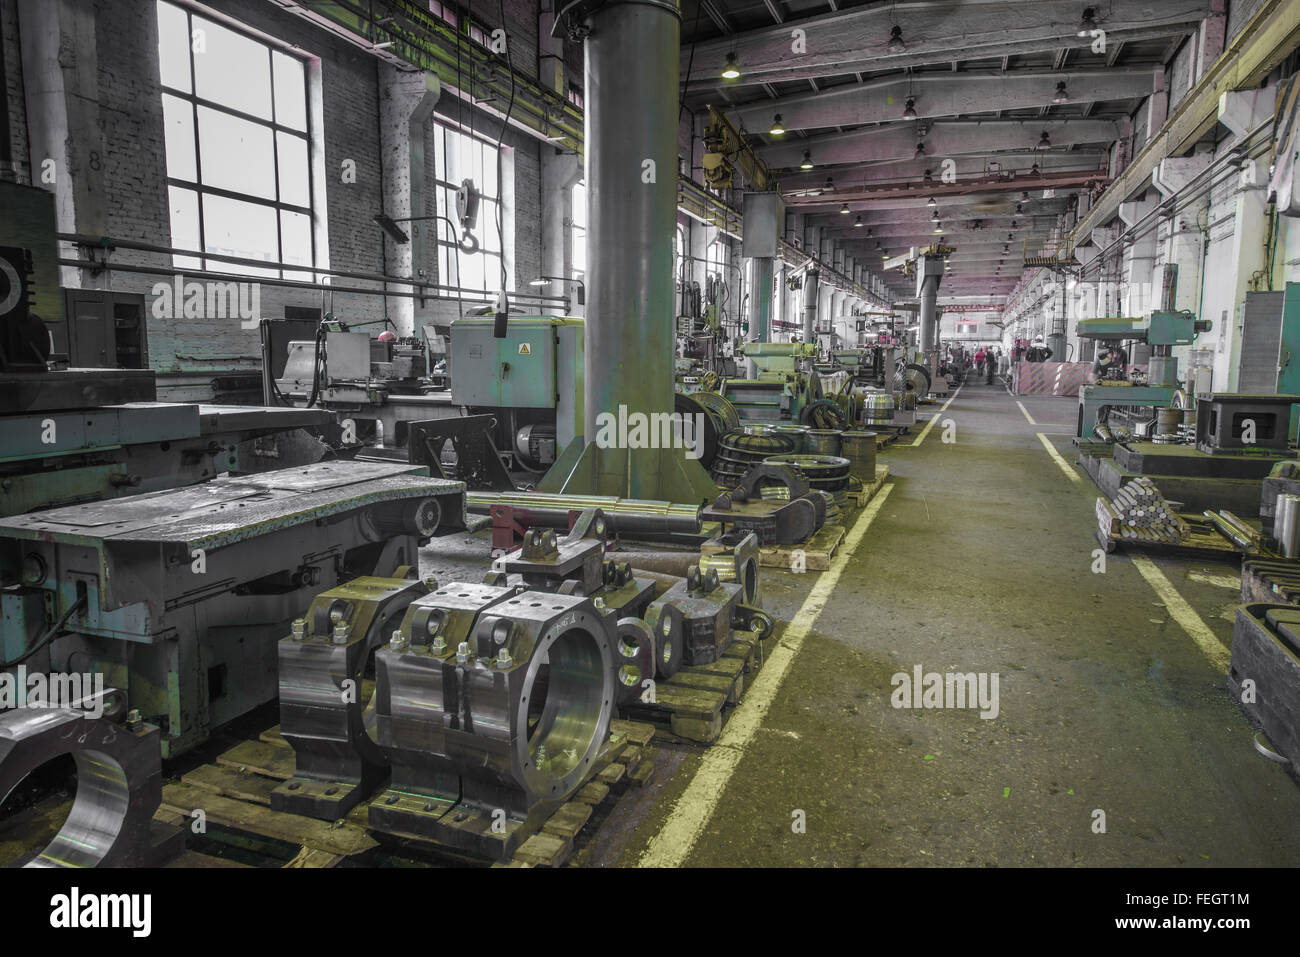 Interior of an industrial building with machines Stock Photo